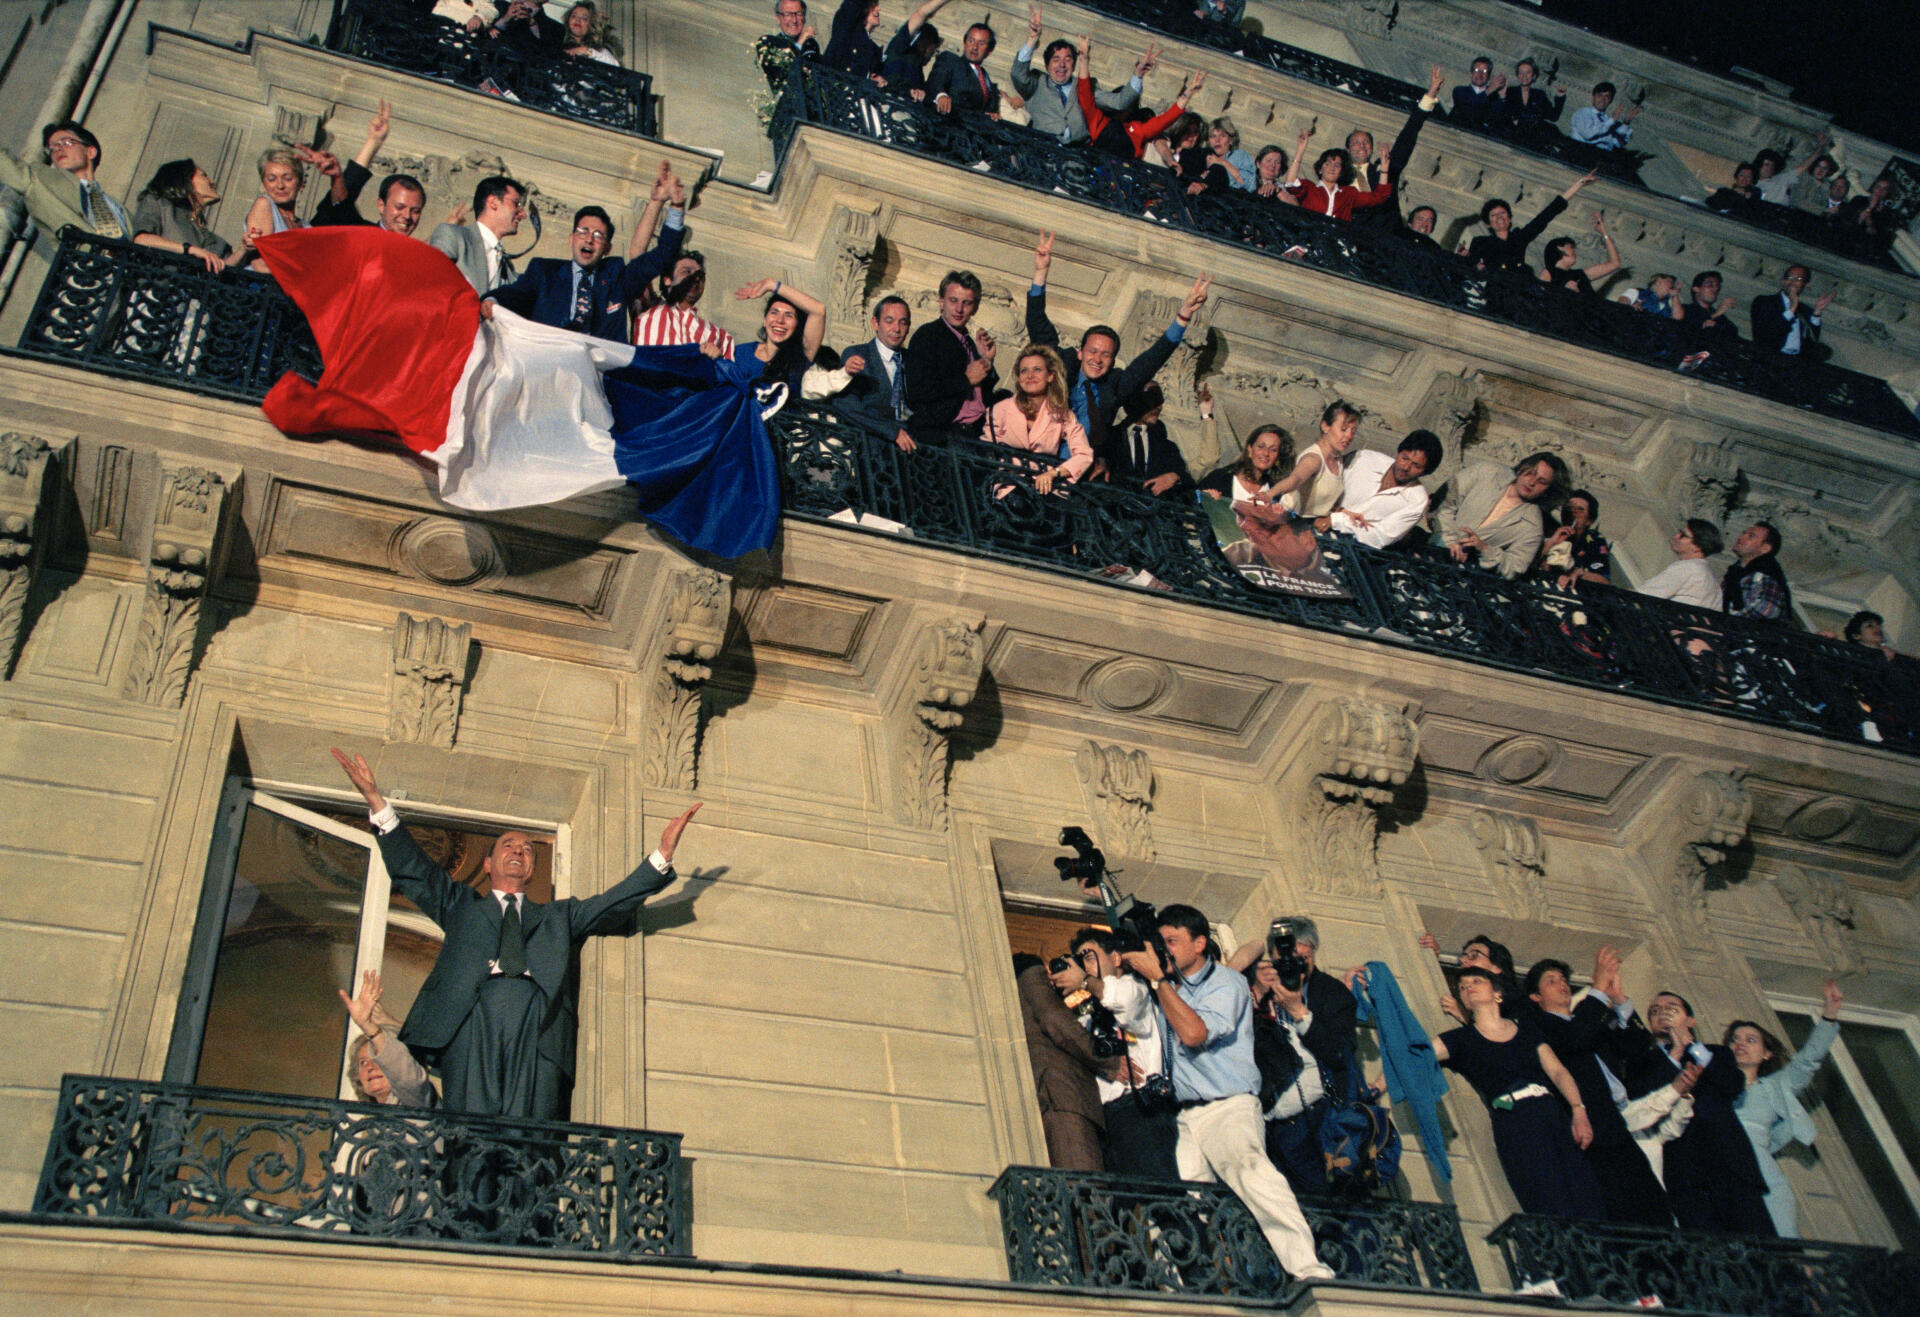 Jacques Chirac waves to the crowd from the balcony of the RPR electoral office on Avenue d'Iéna in Paris on May 7, 1995, the evening of his presidential election victory.